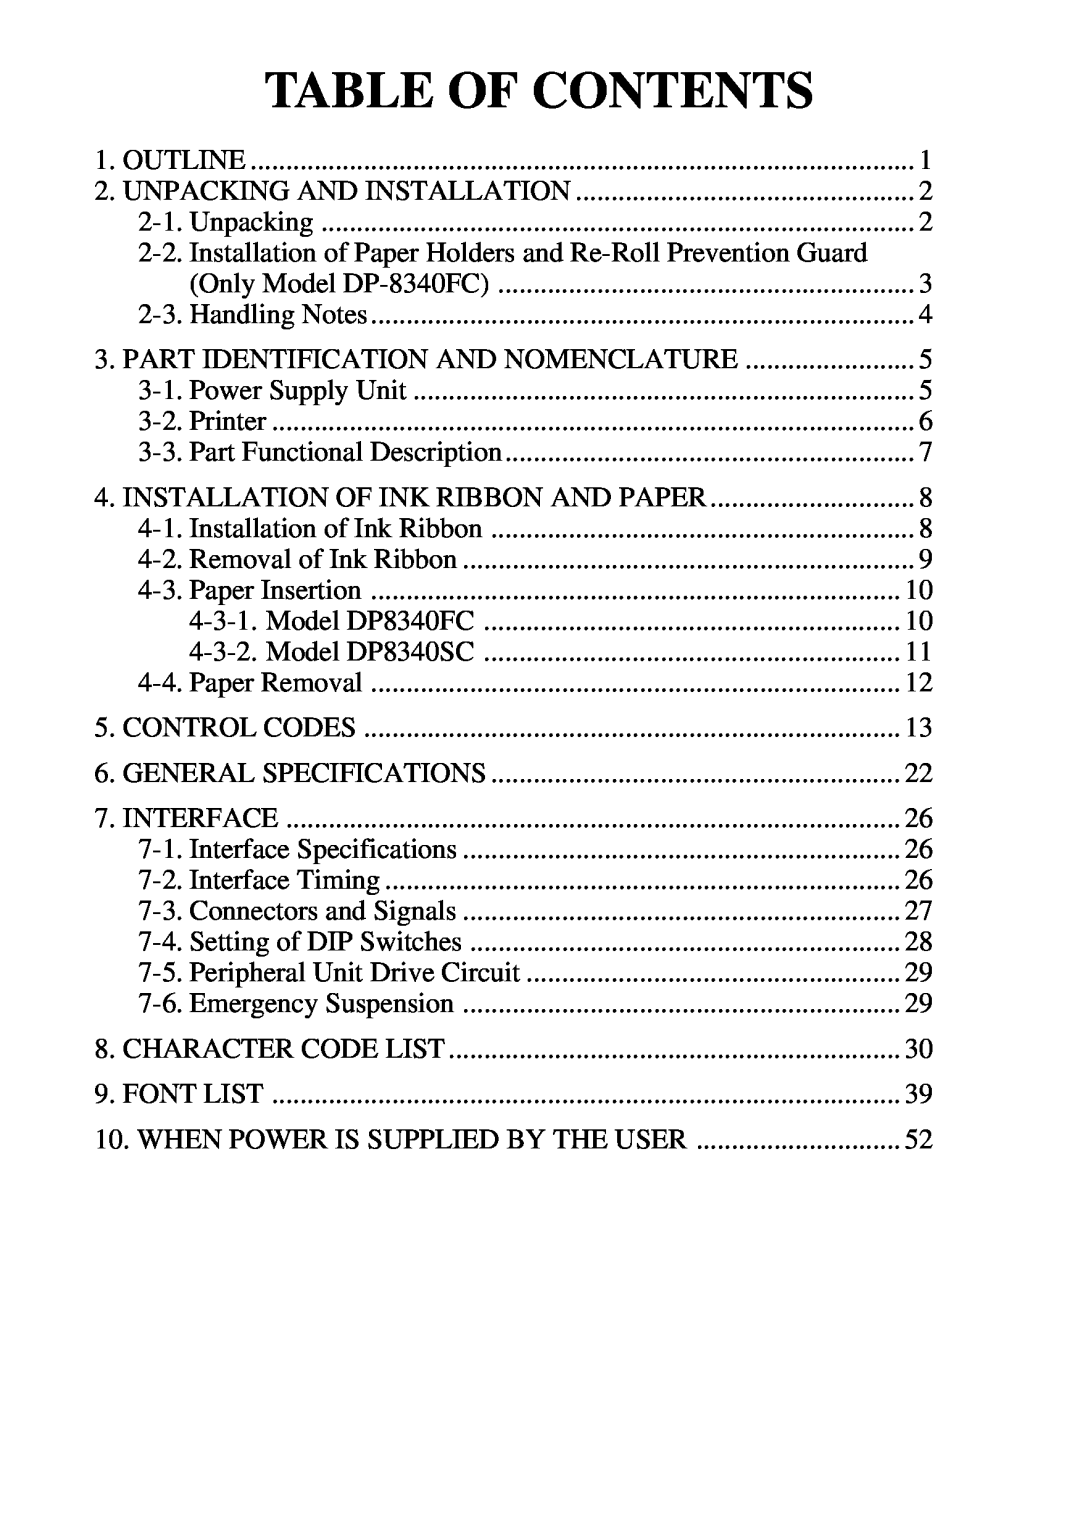 Star Micronics DP8340 user manual Table Of Contents, Installation of Paper Holders and Re-Roll Prevention Guard 